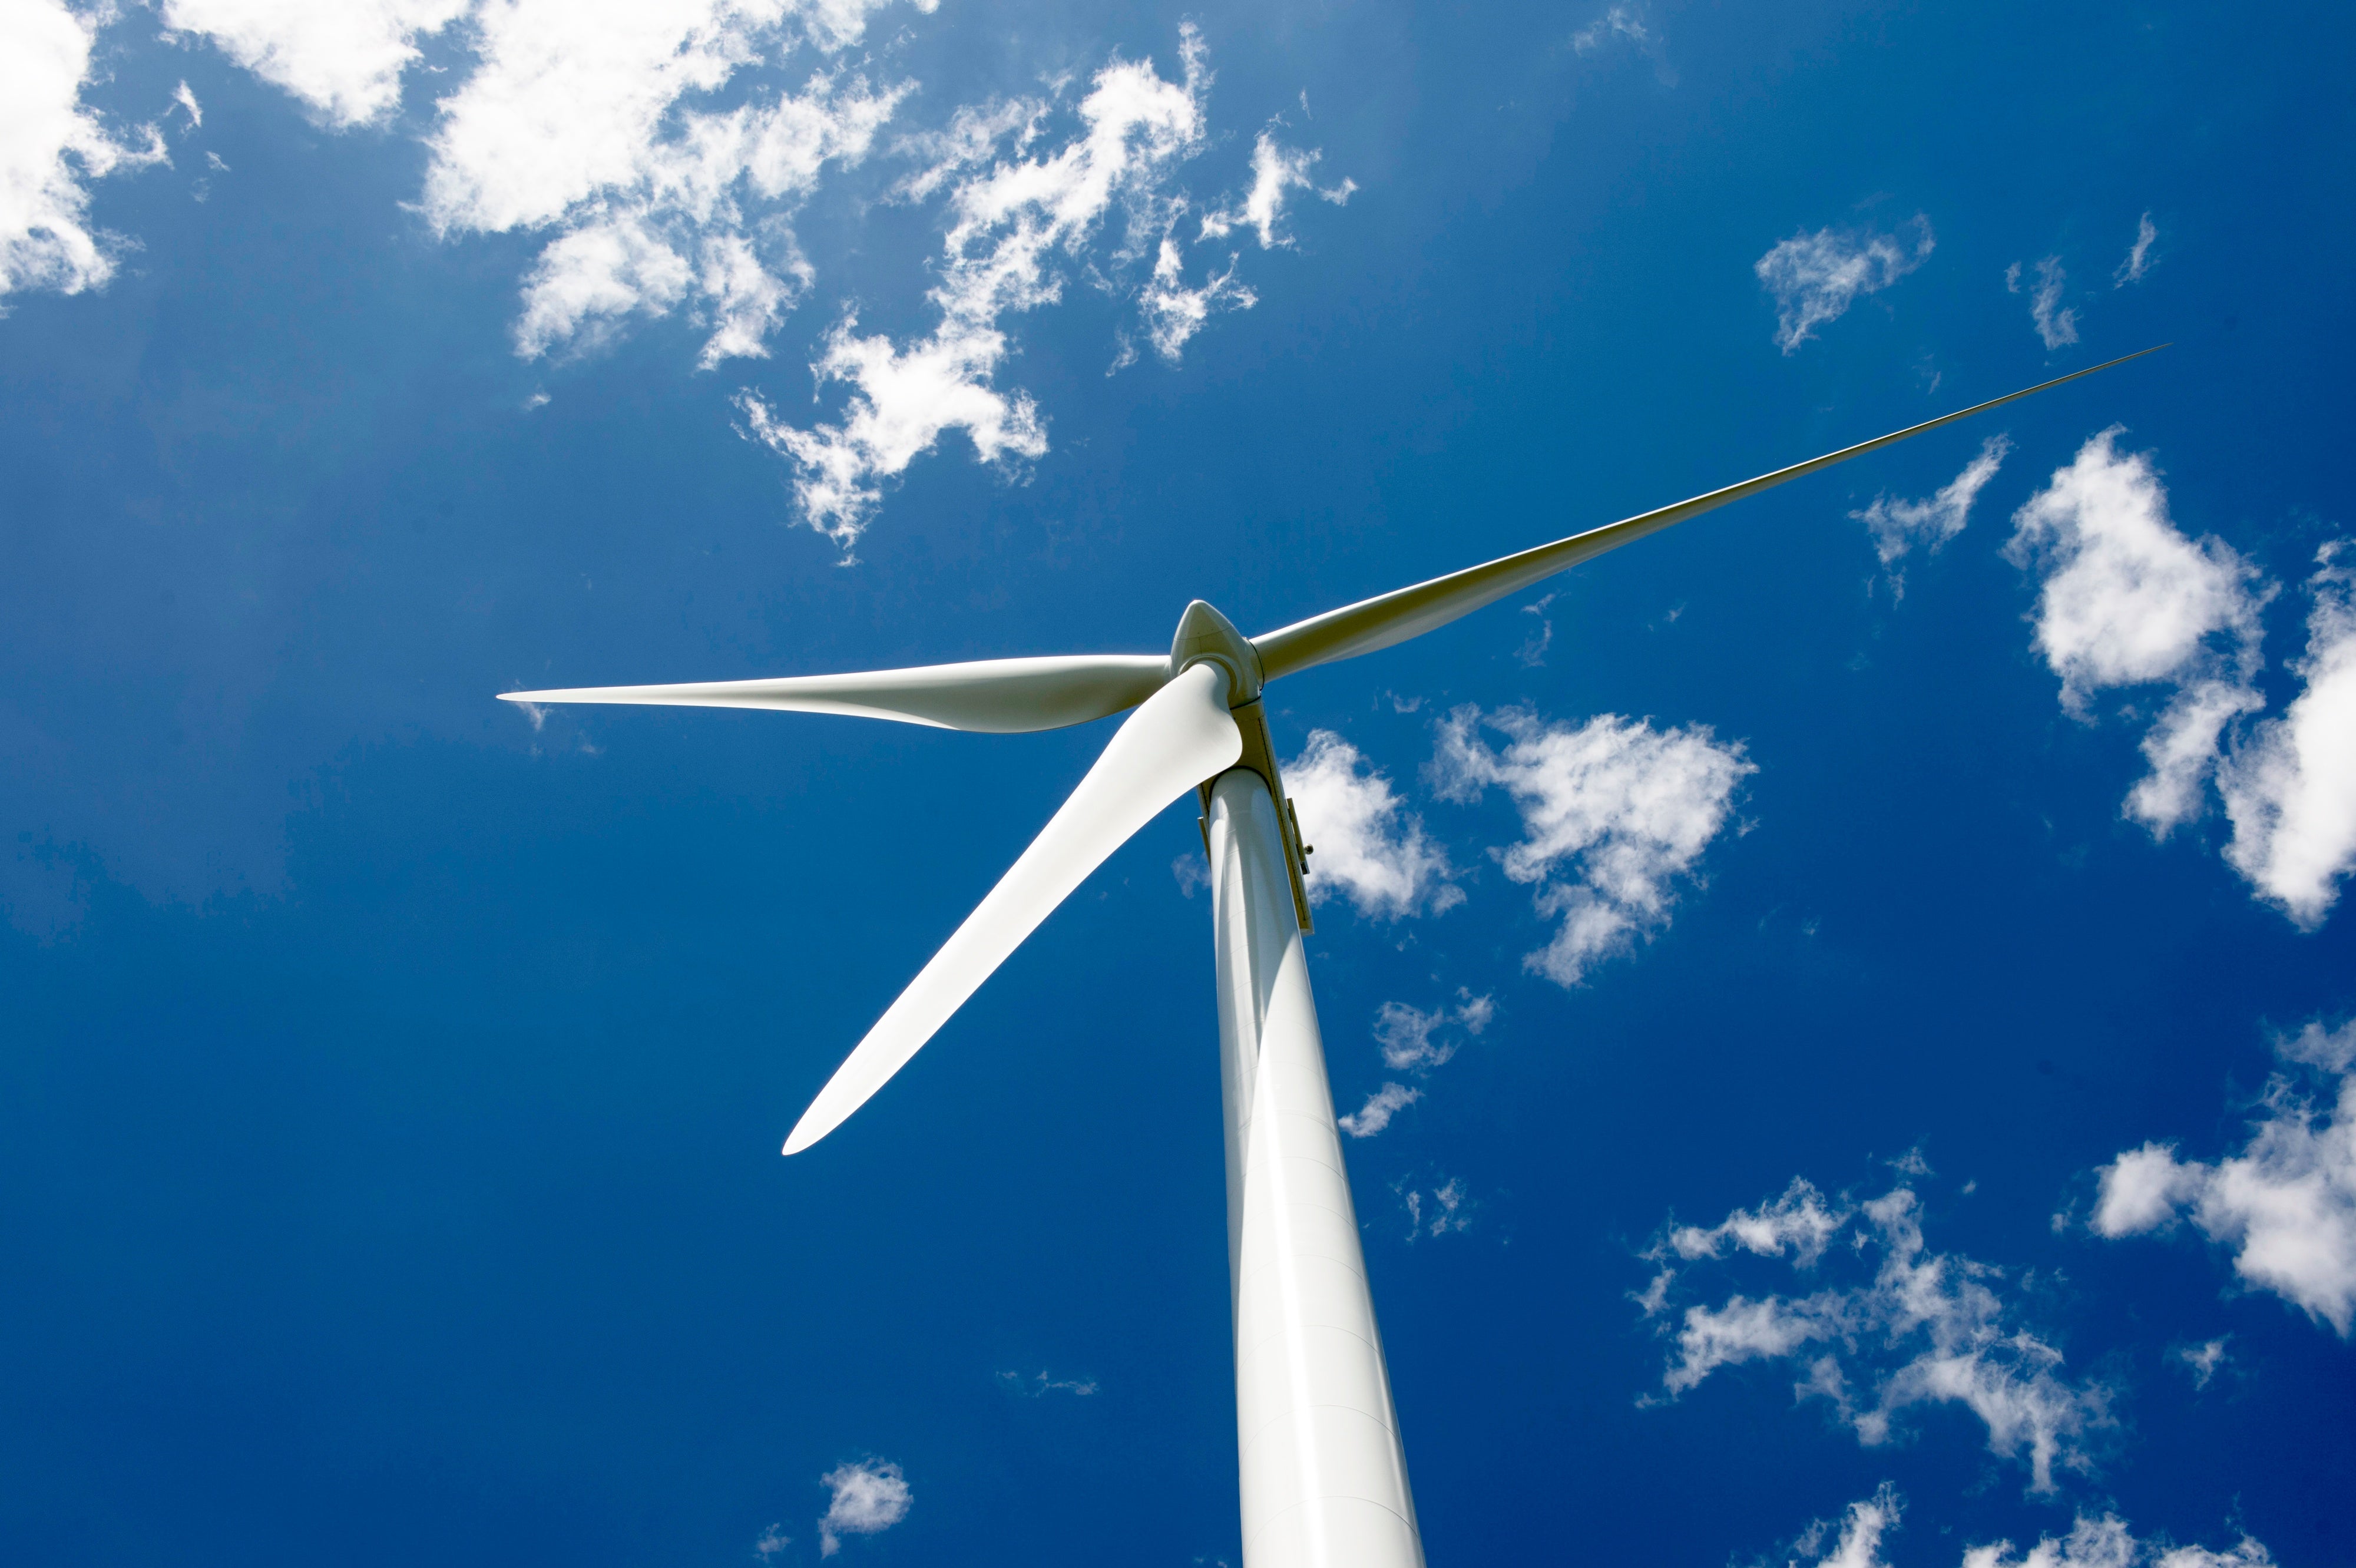 World's Wind Turbine Would Be Taller Than the Empire Building - Scientific American